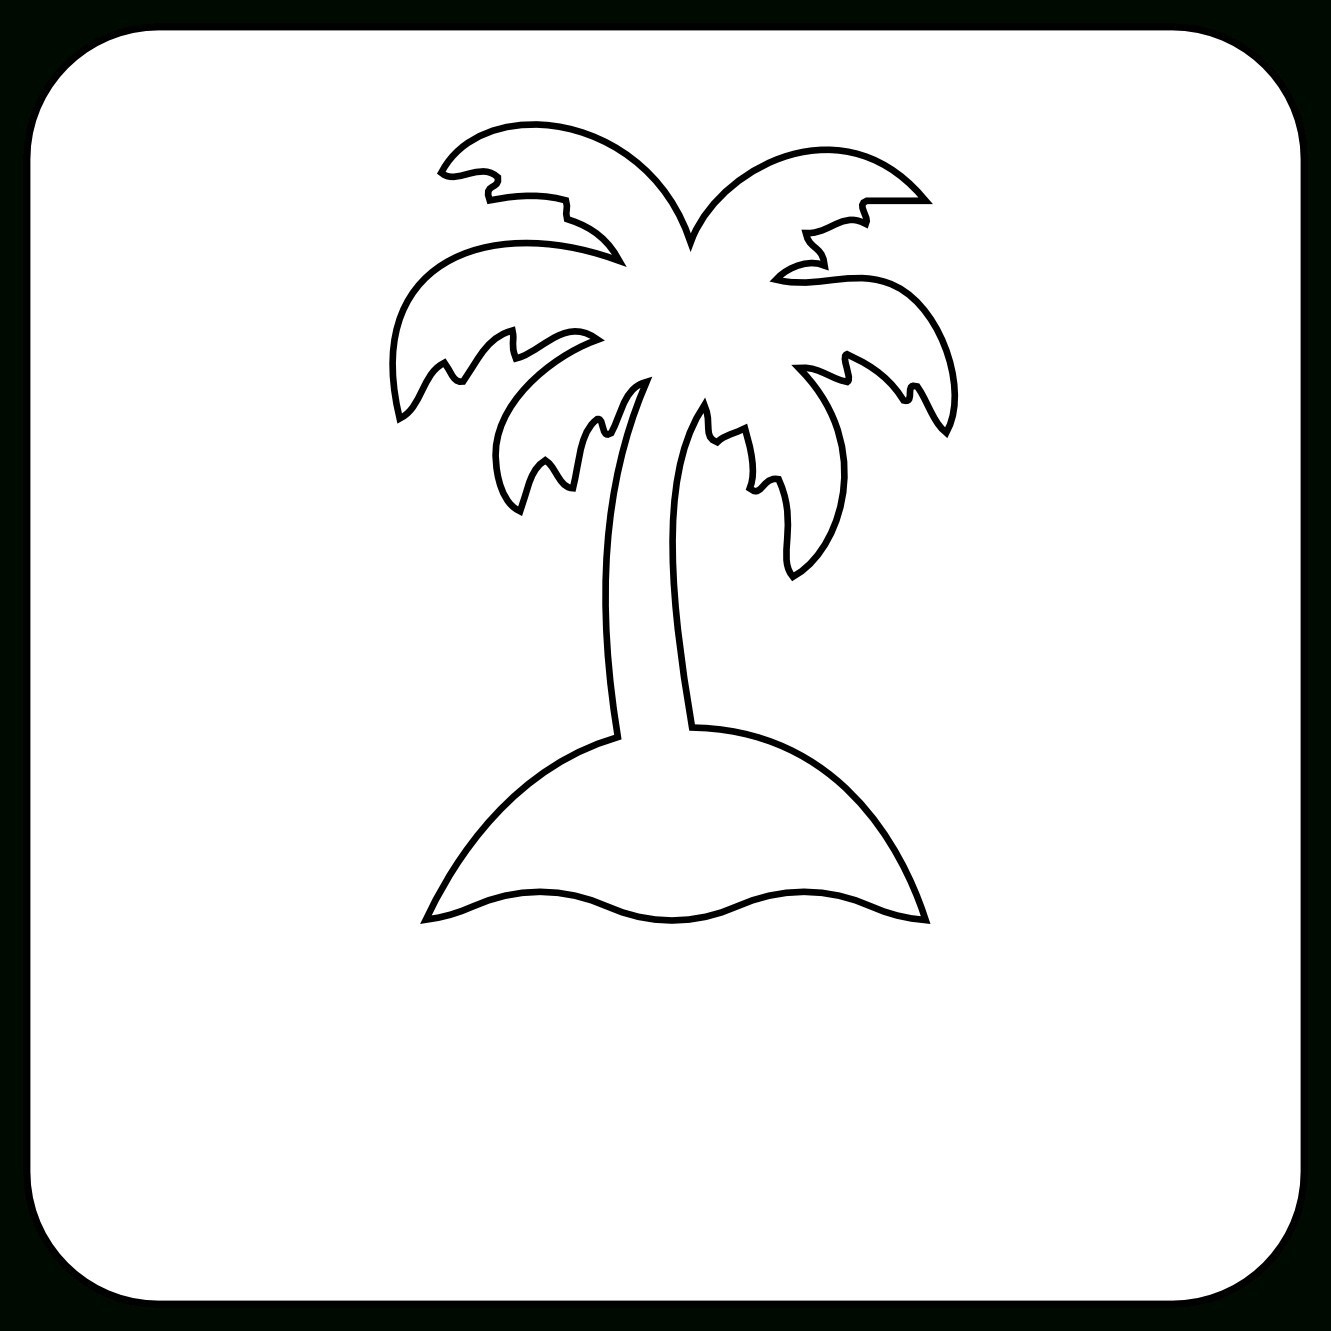 Simple Drawing Of A Palm Tree at PaintingValley.com | Explore ...